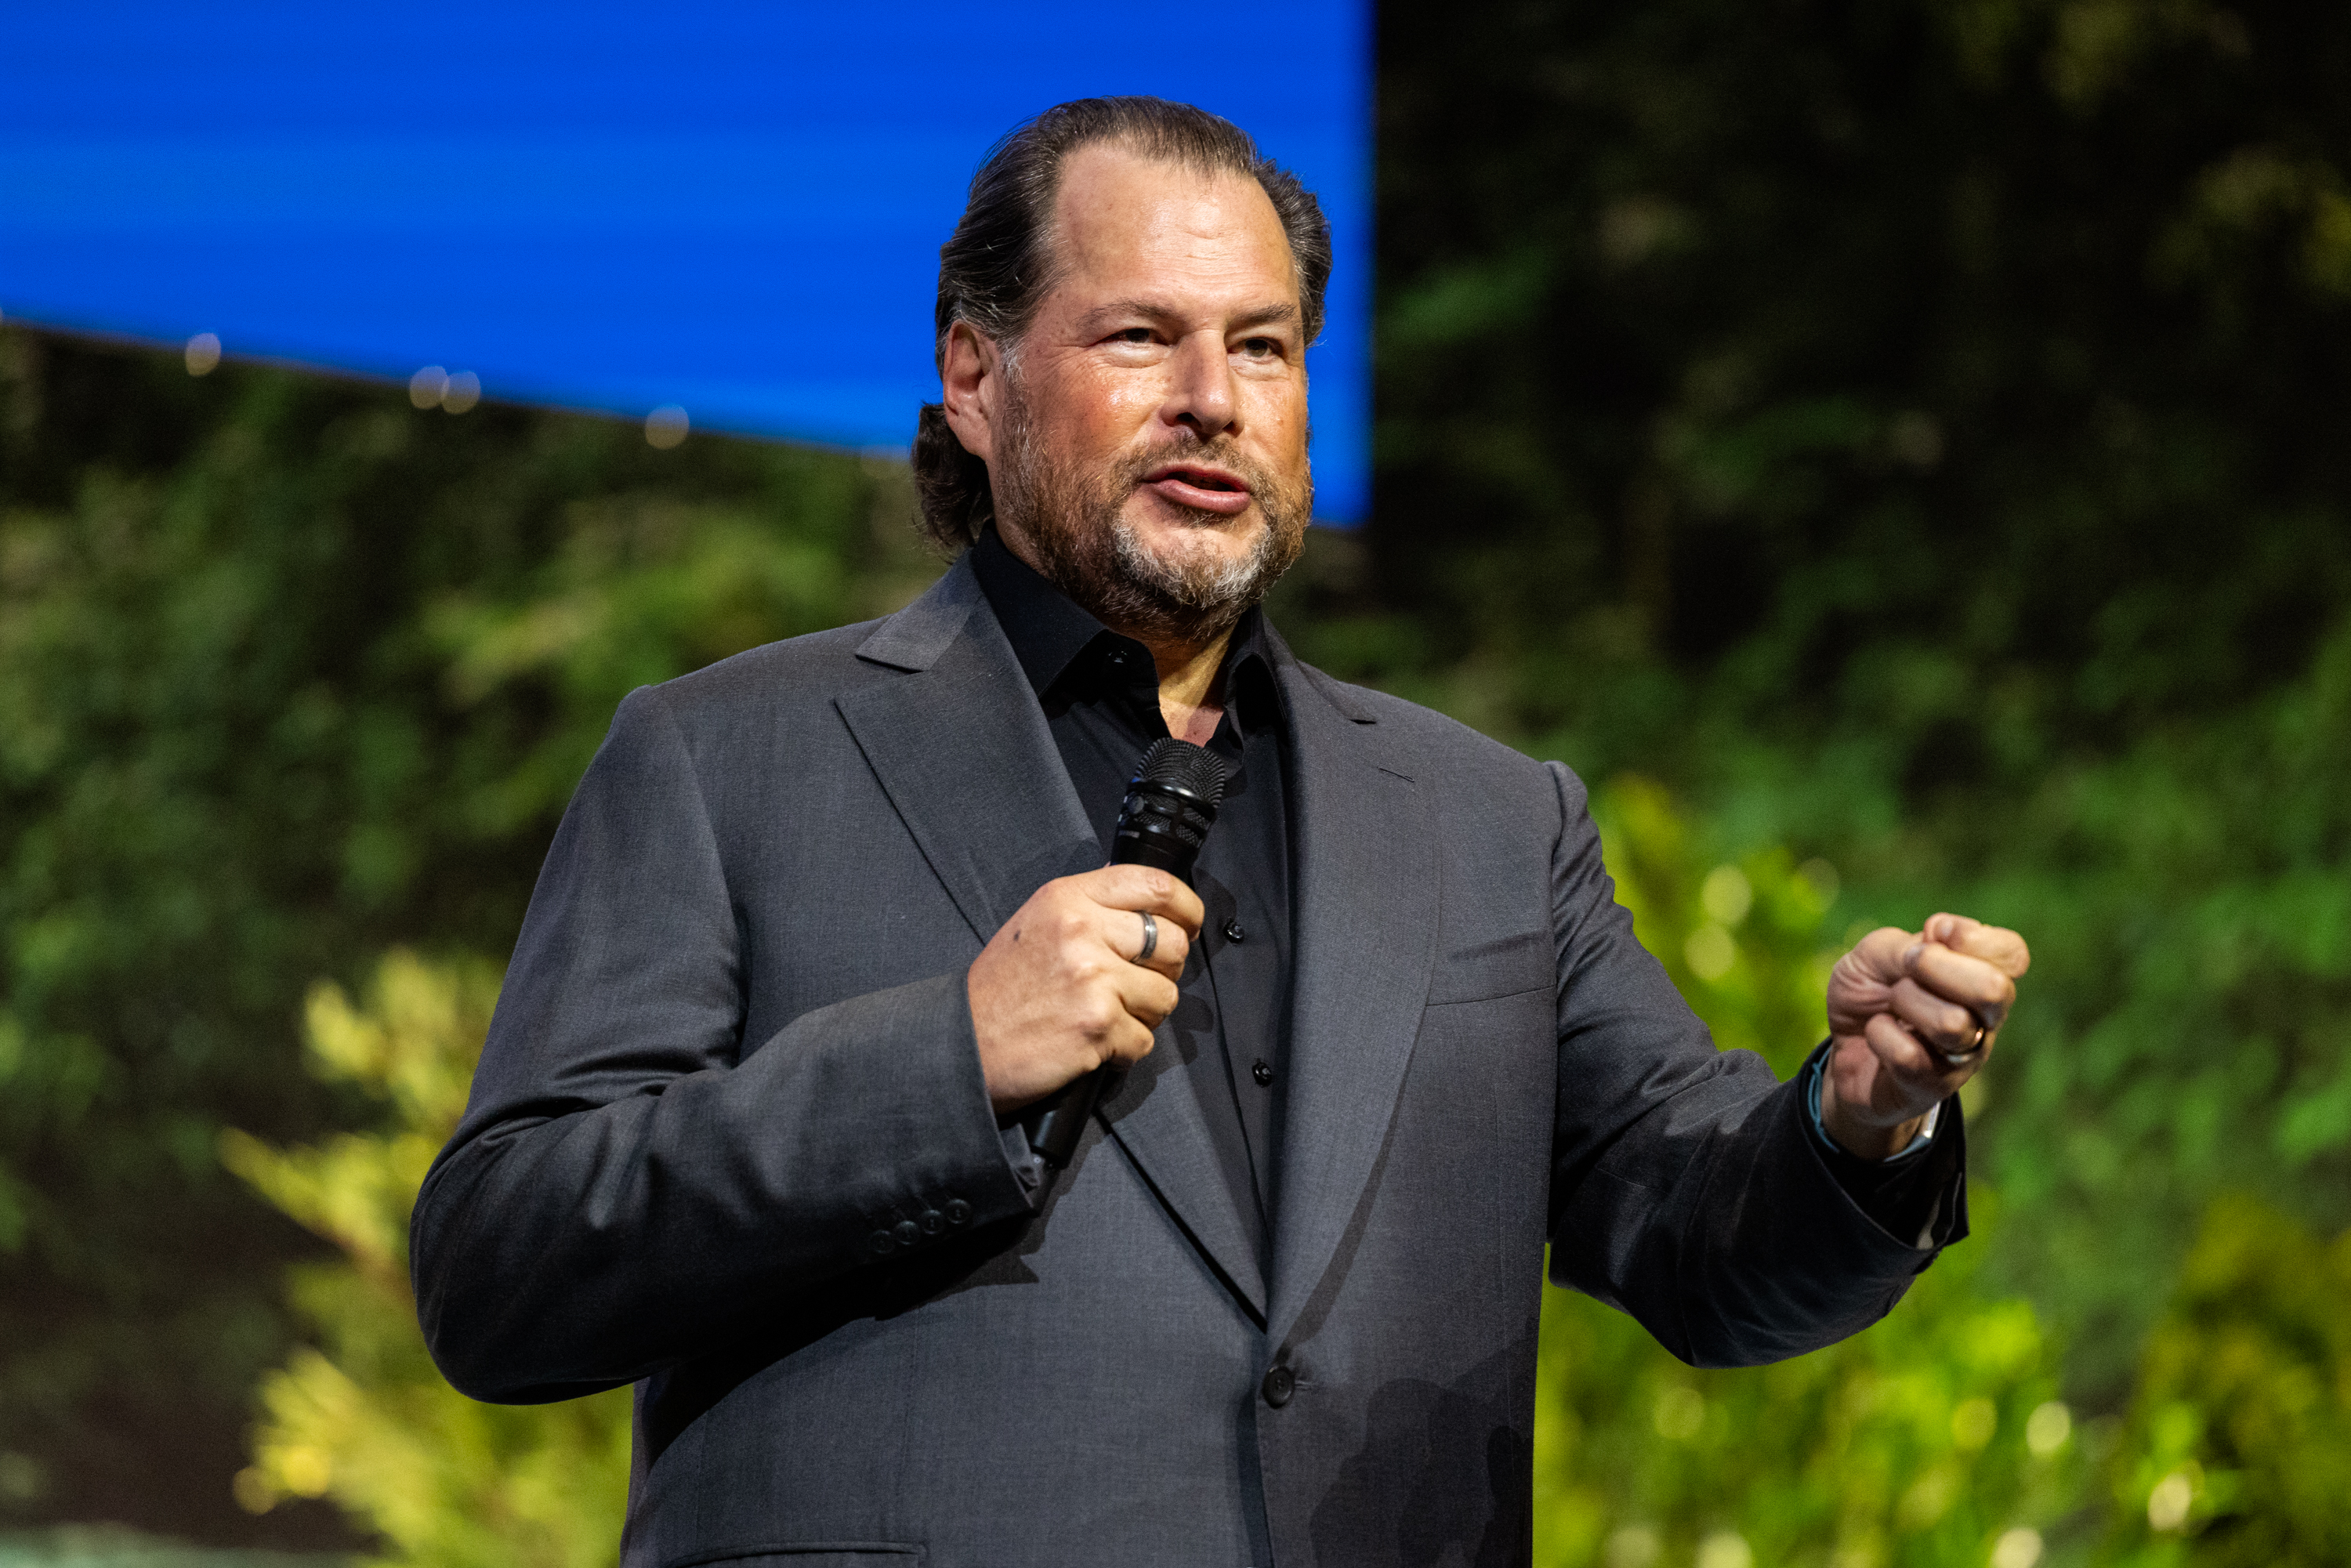 A man in a gray suit and black shirt is speaking into a microphone on stage, gesturing with one hand. The background is a mix of green foliage and a blue screen.